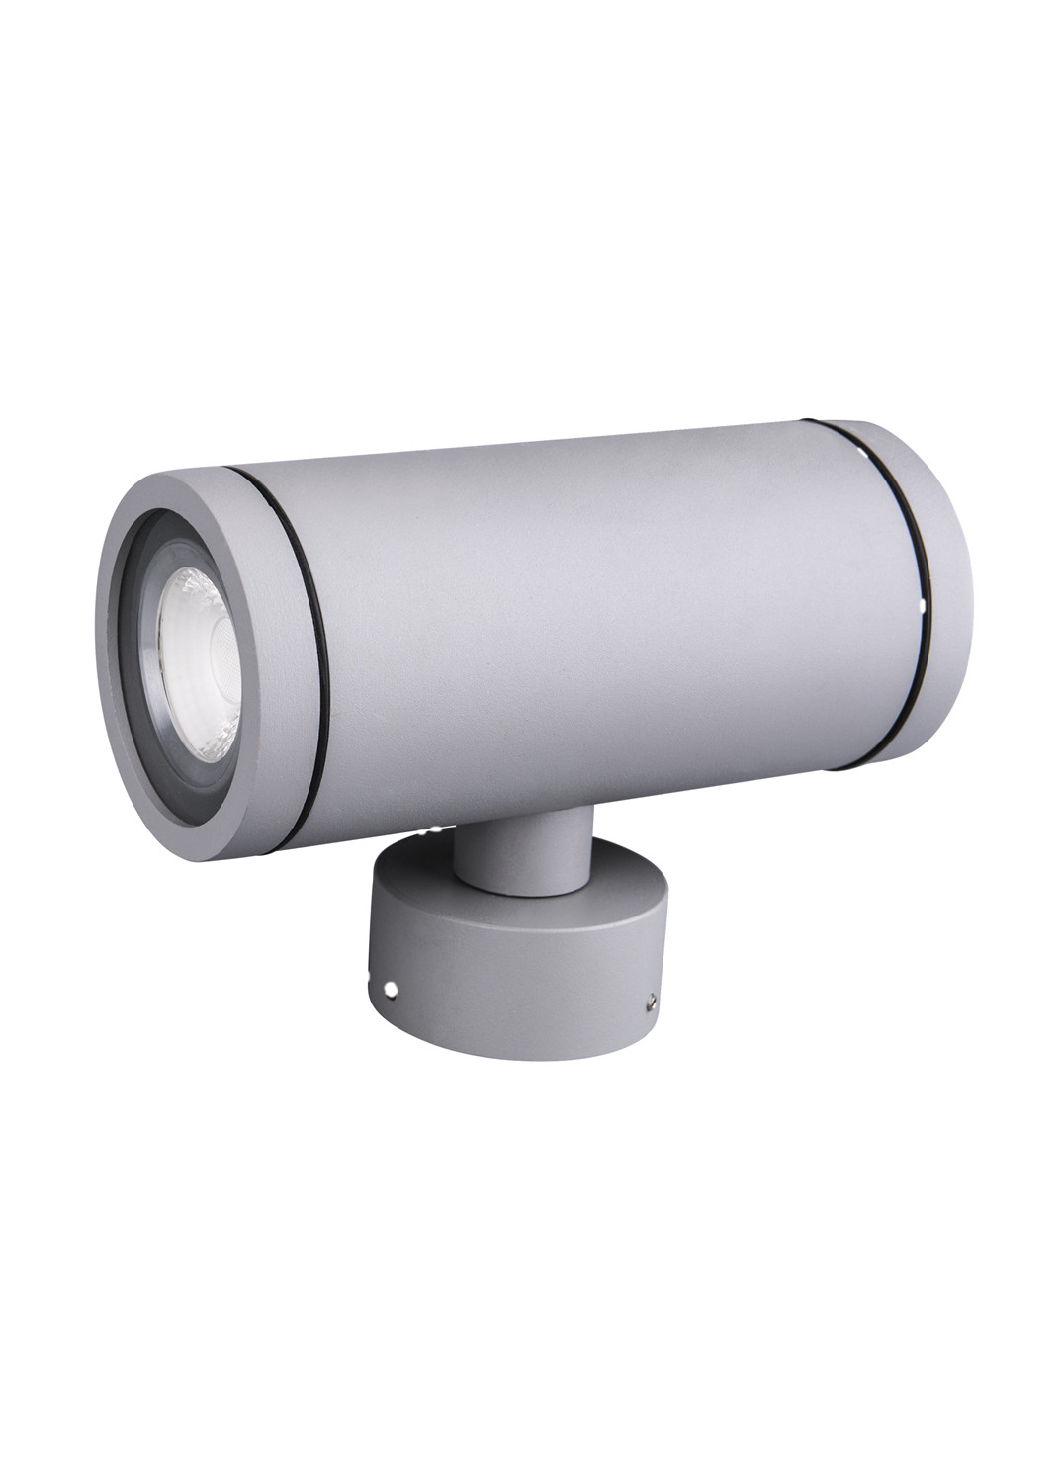 Wall Wash Cylinder Lights Wall Light Up Down Wall Washer Downlight Lamp Tube LED Lighting Fixture